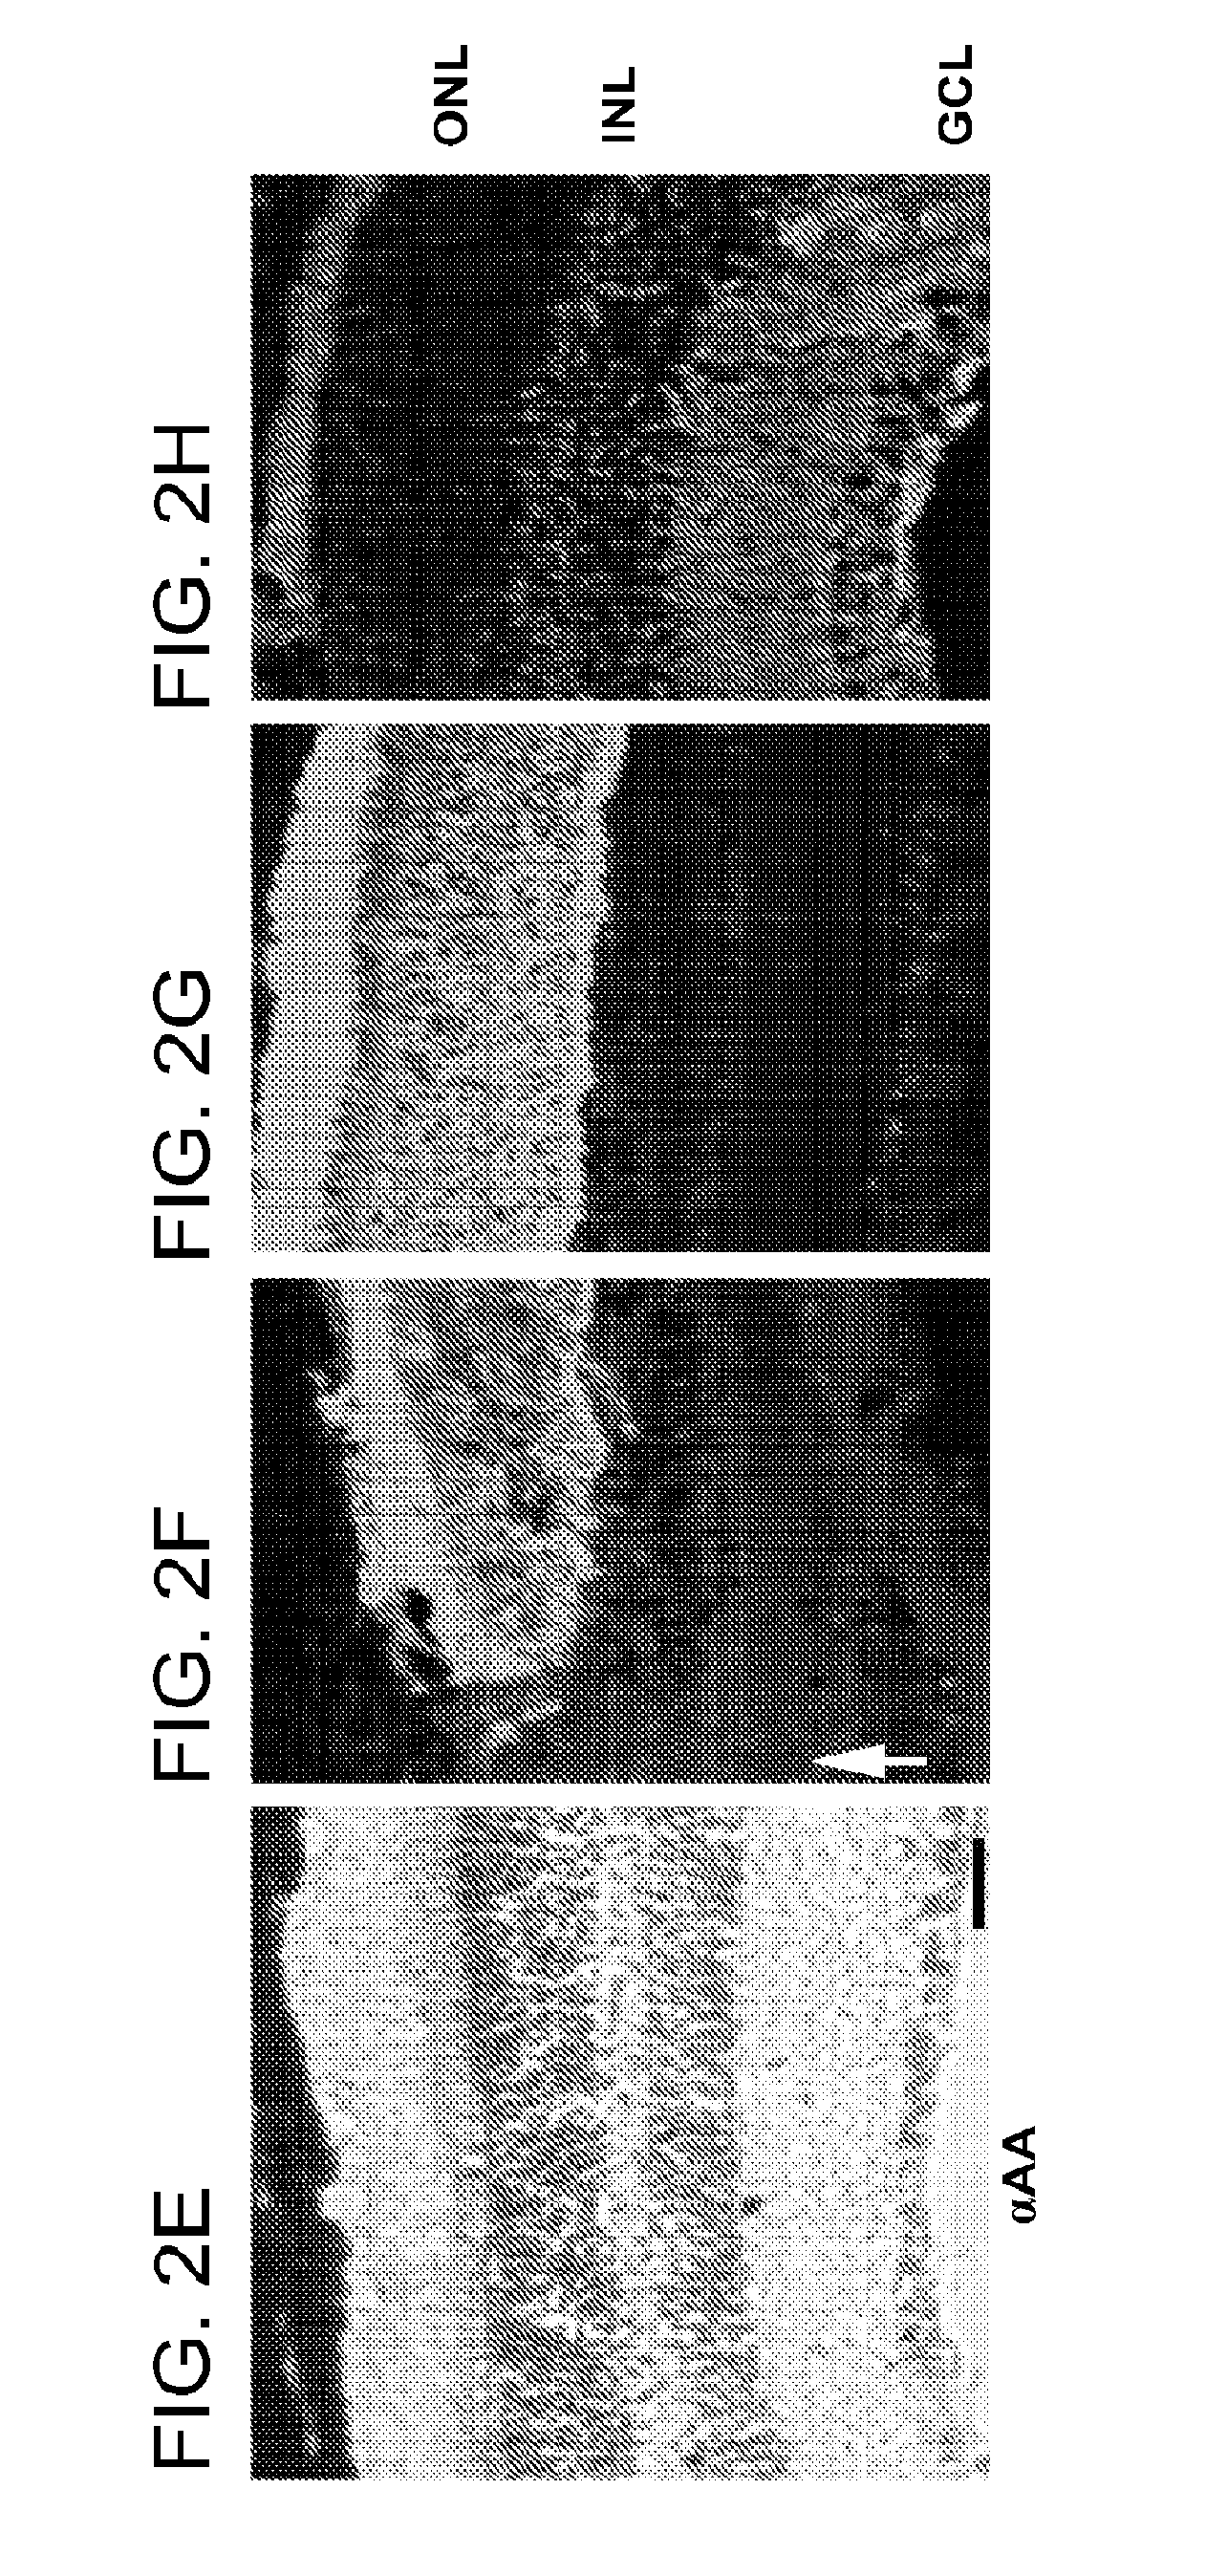 Alpha-Aminoadipate For Treatment Of Vision Loss And Restoring Sight